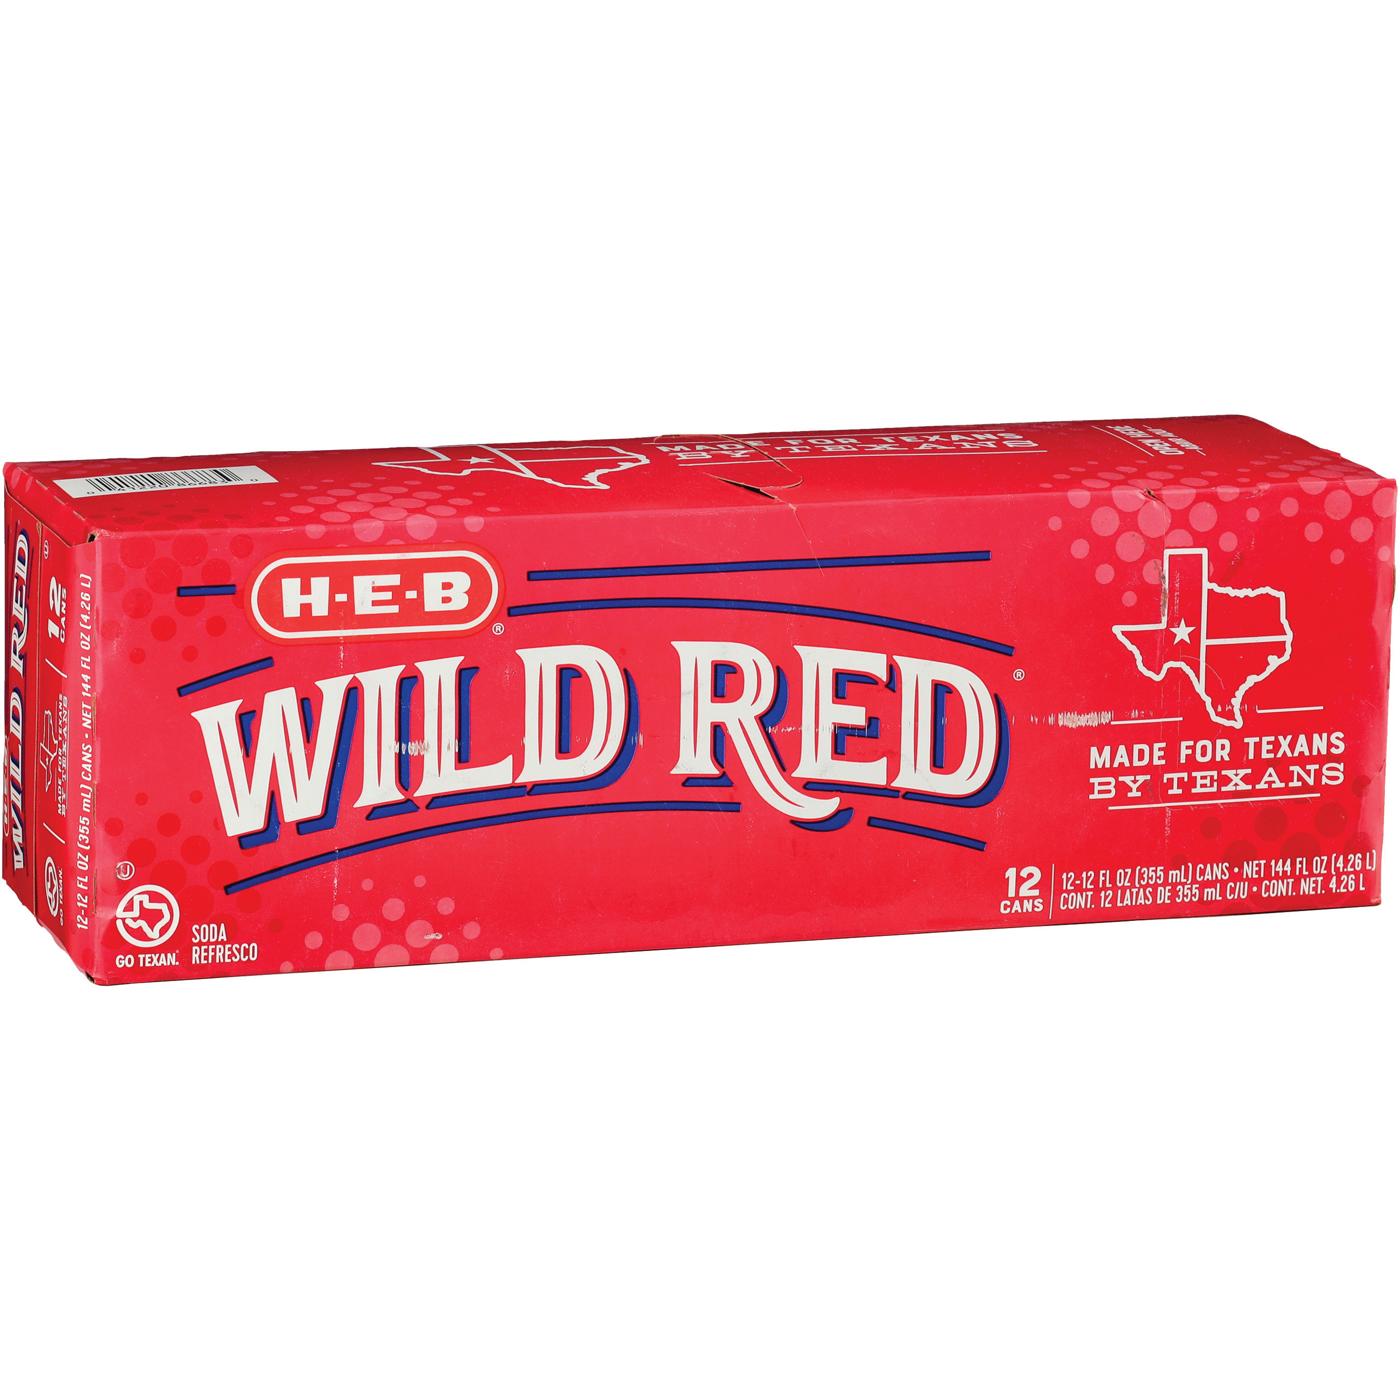 H-E-B Wild Red Soda 12 pk Cans; image 2 of 2